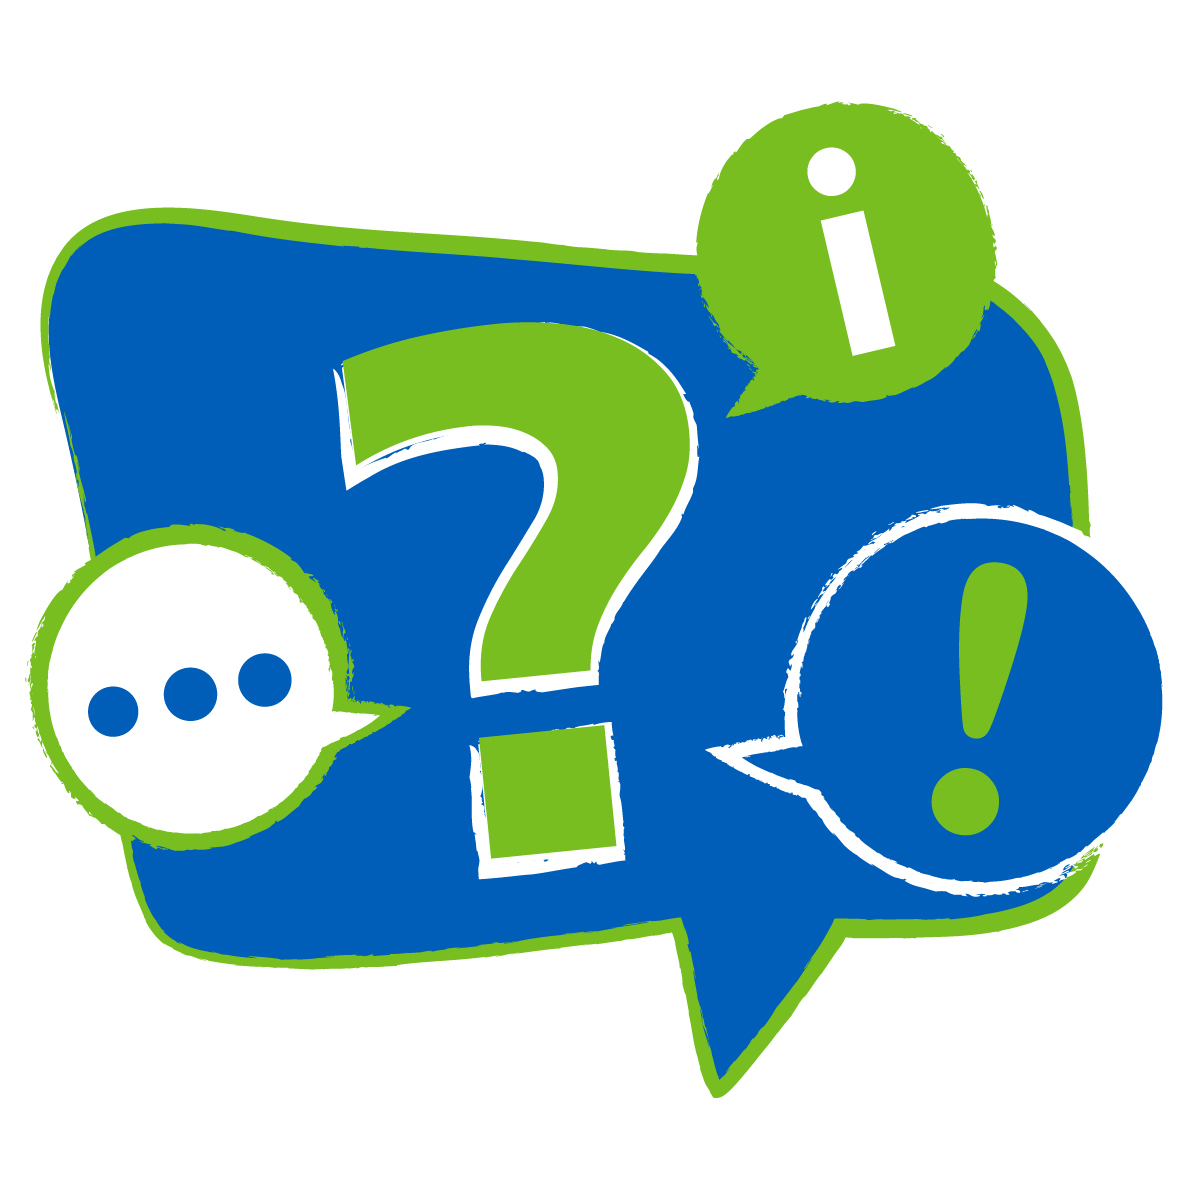 icon of speech bubbles containing question and exclamation marks